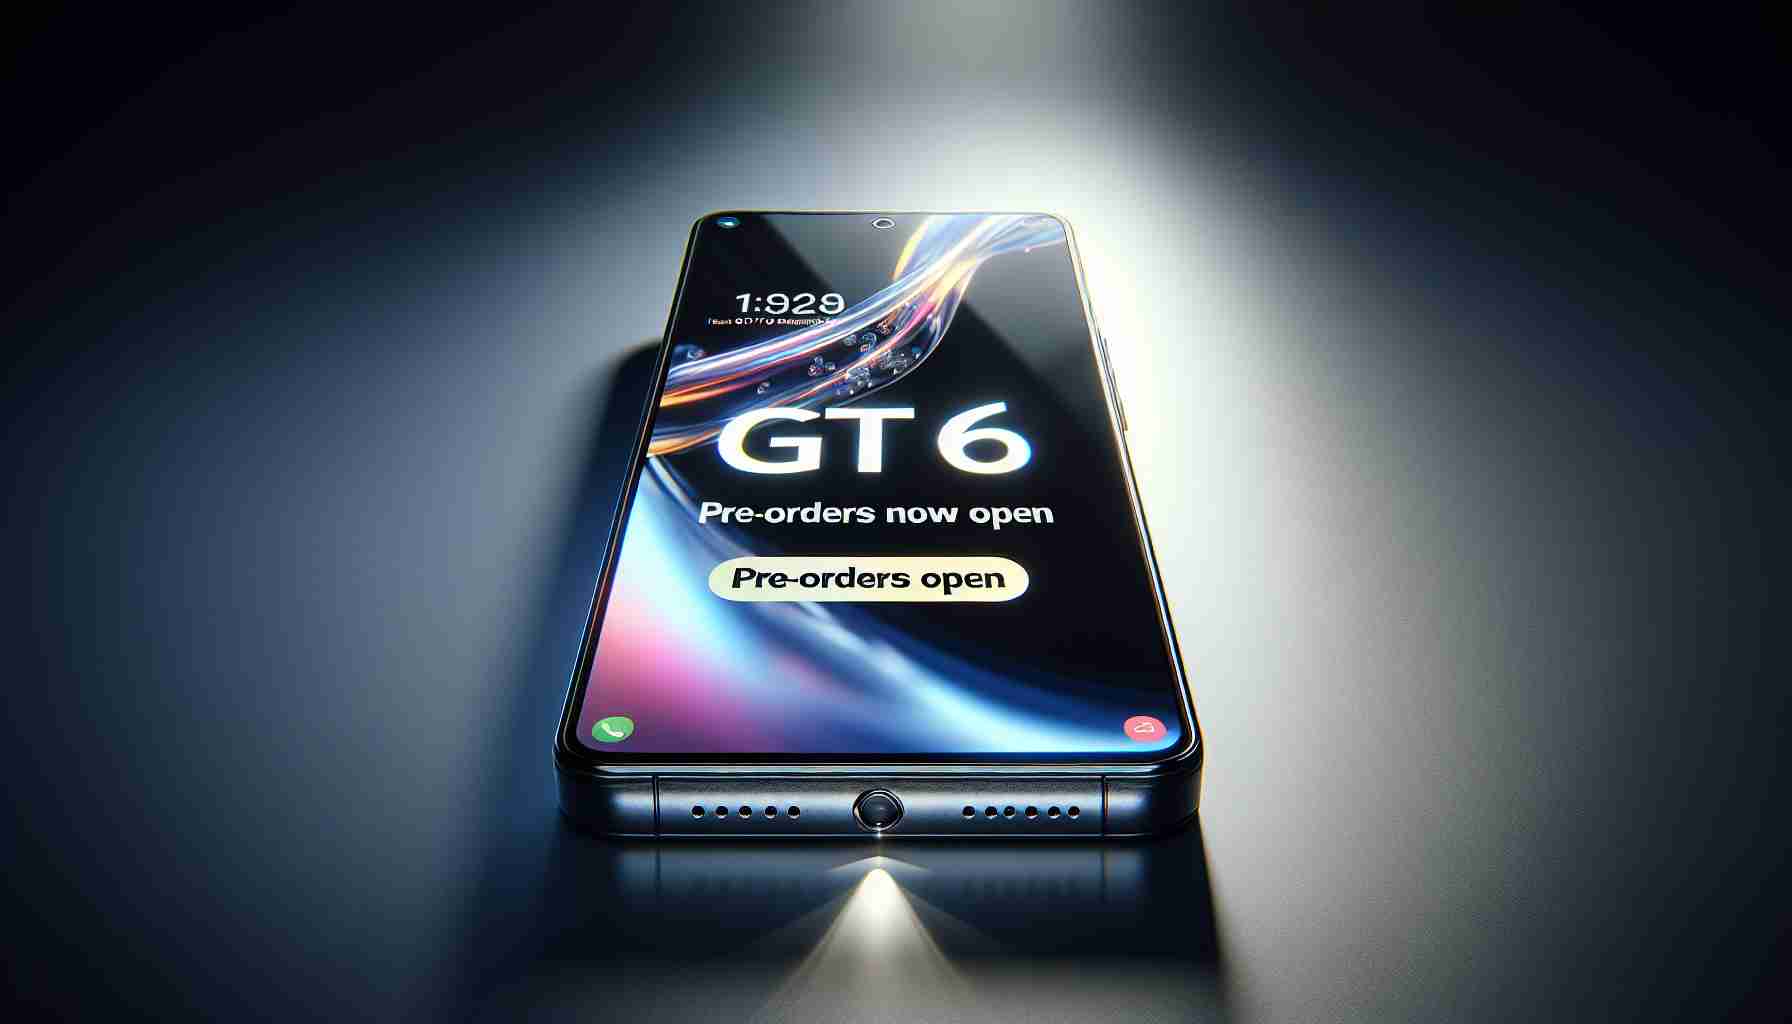 Realme GT6 Set to Launch in Europe with Pre-orders Now Open